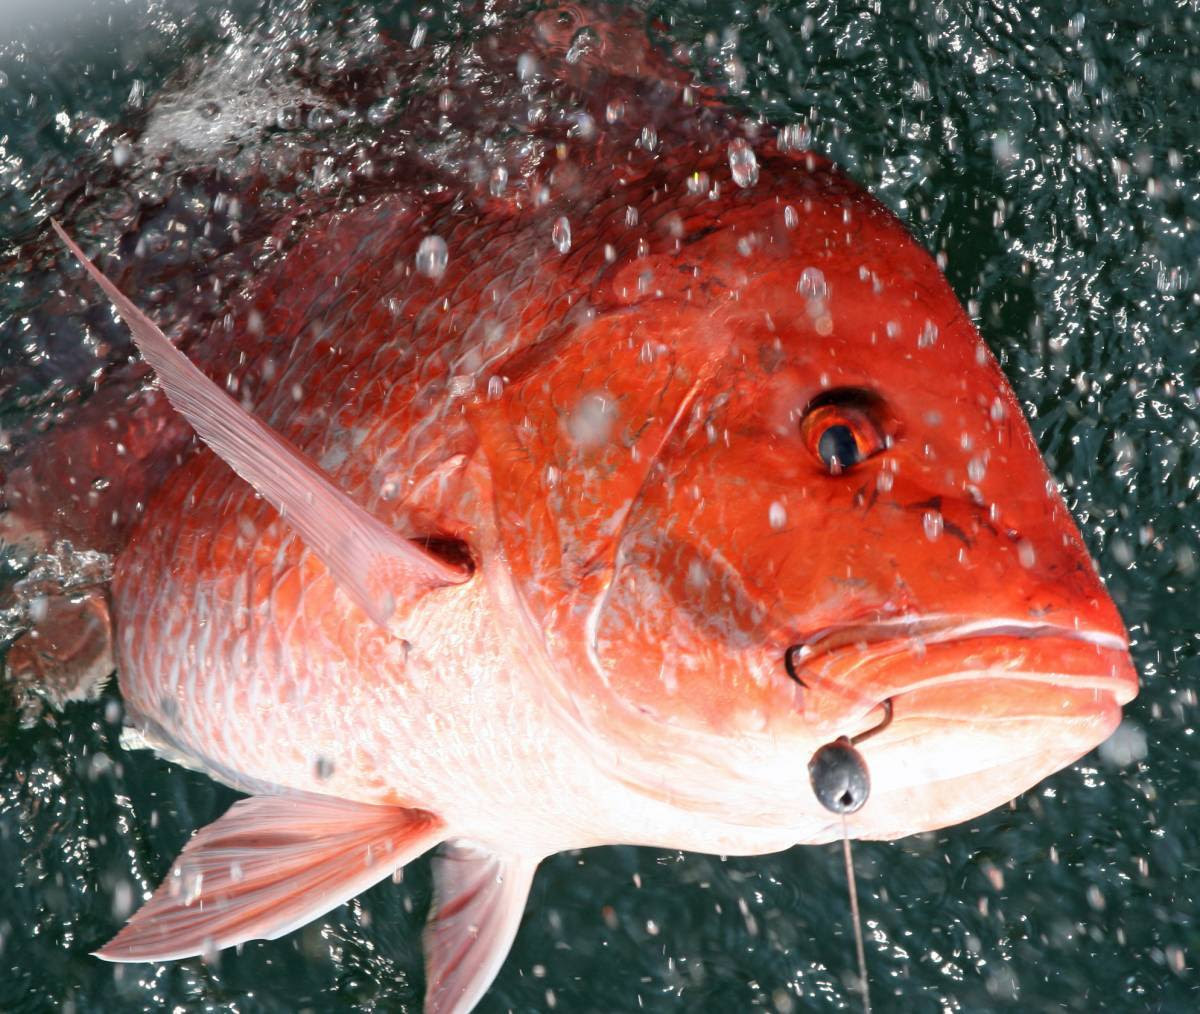 More Red Snapper Days for Alabama Anglers